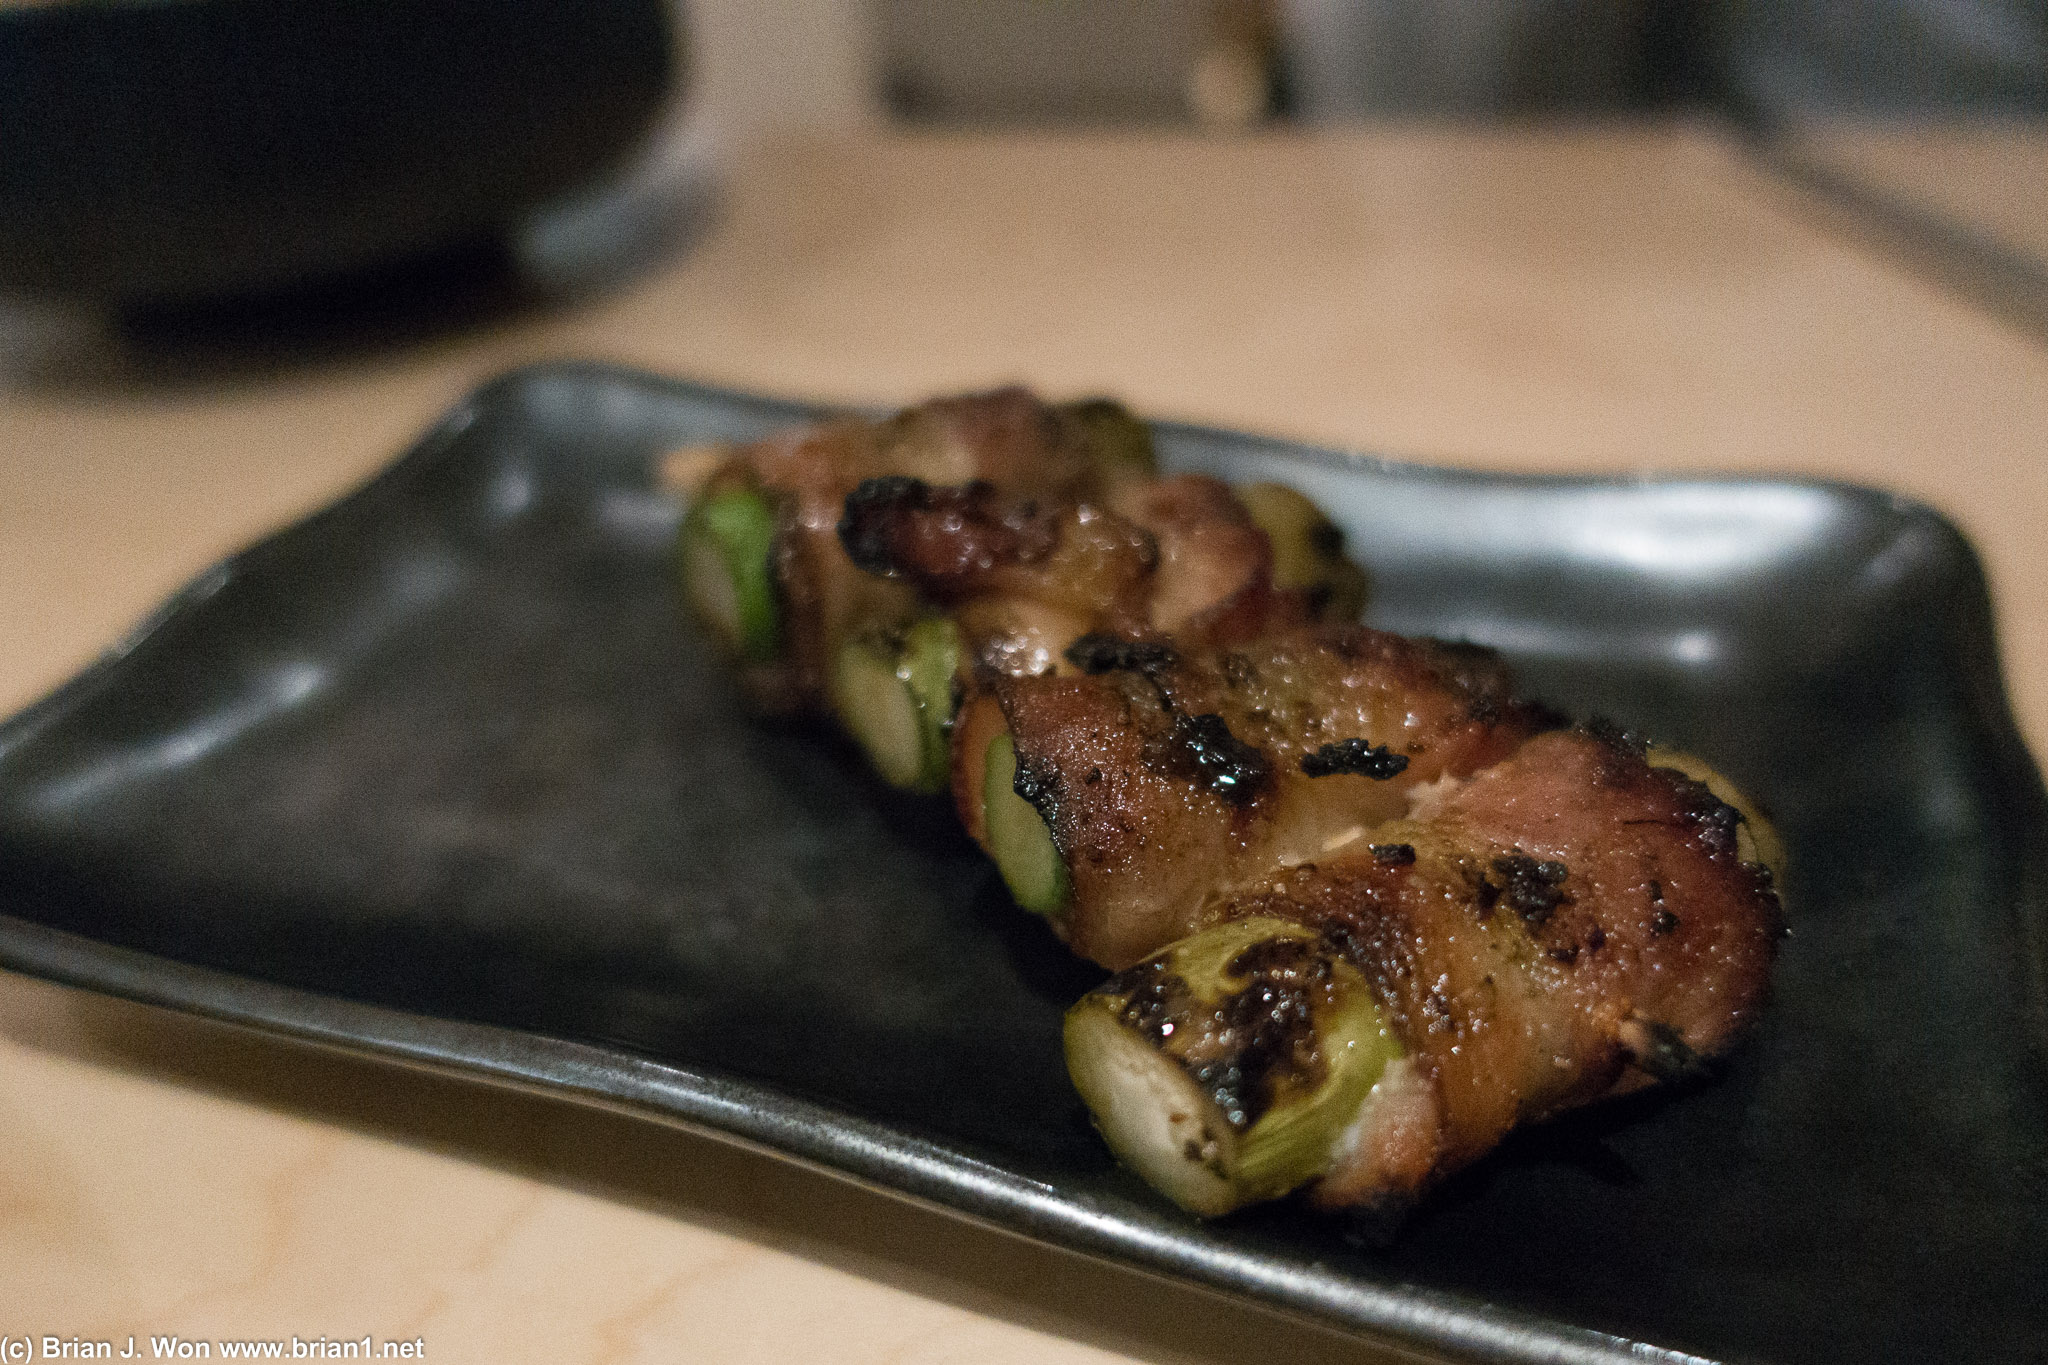 Bacon-wrapped asparagus was pretty decent.